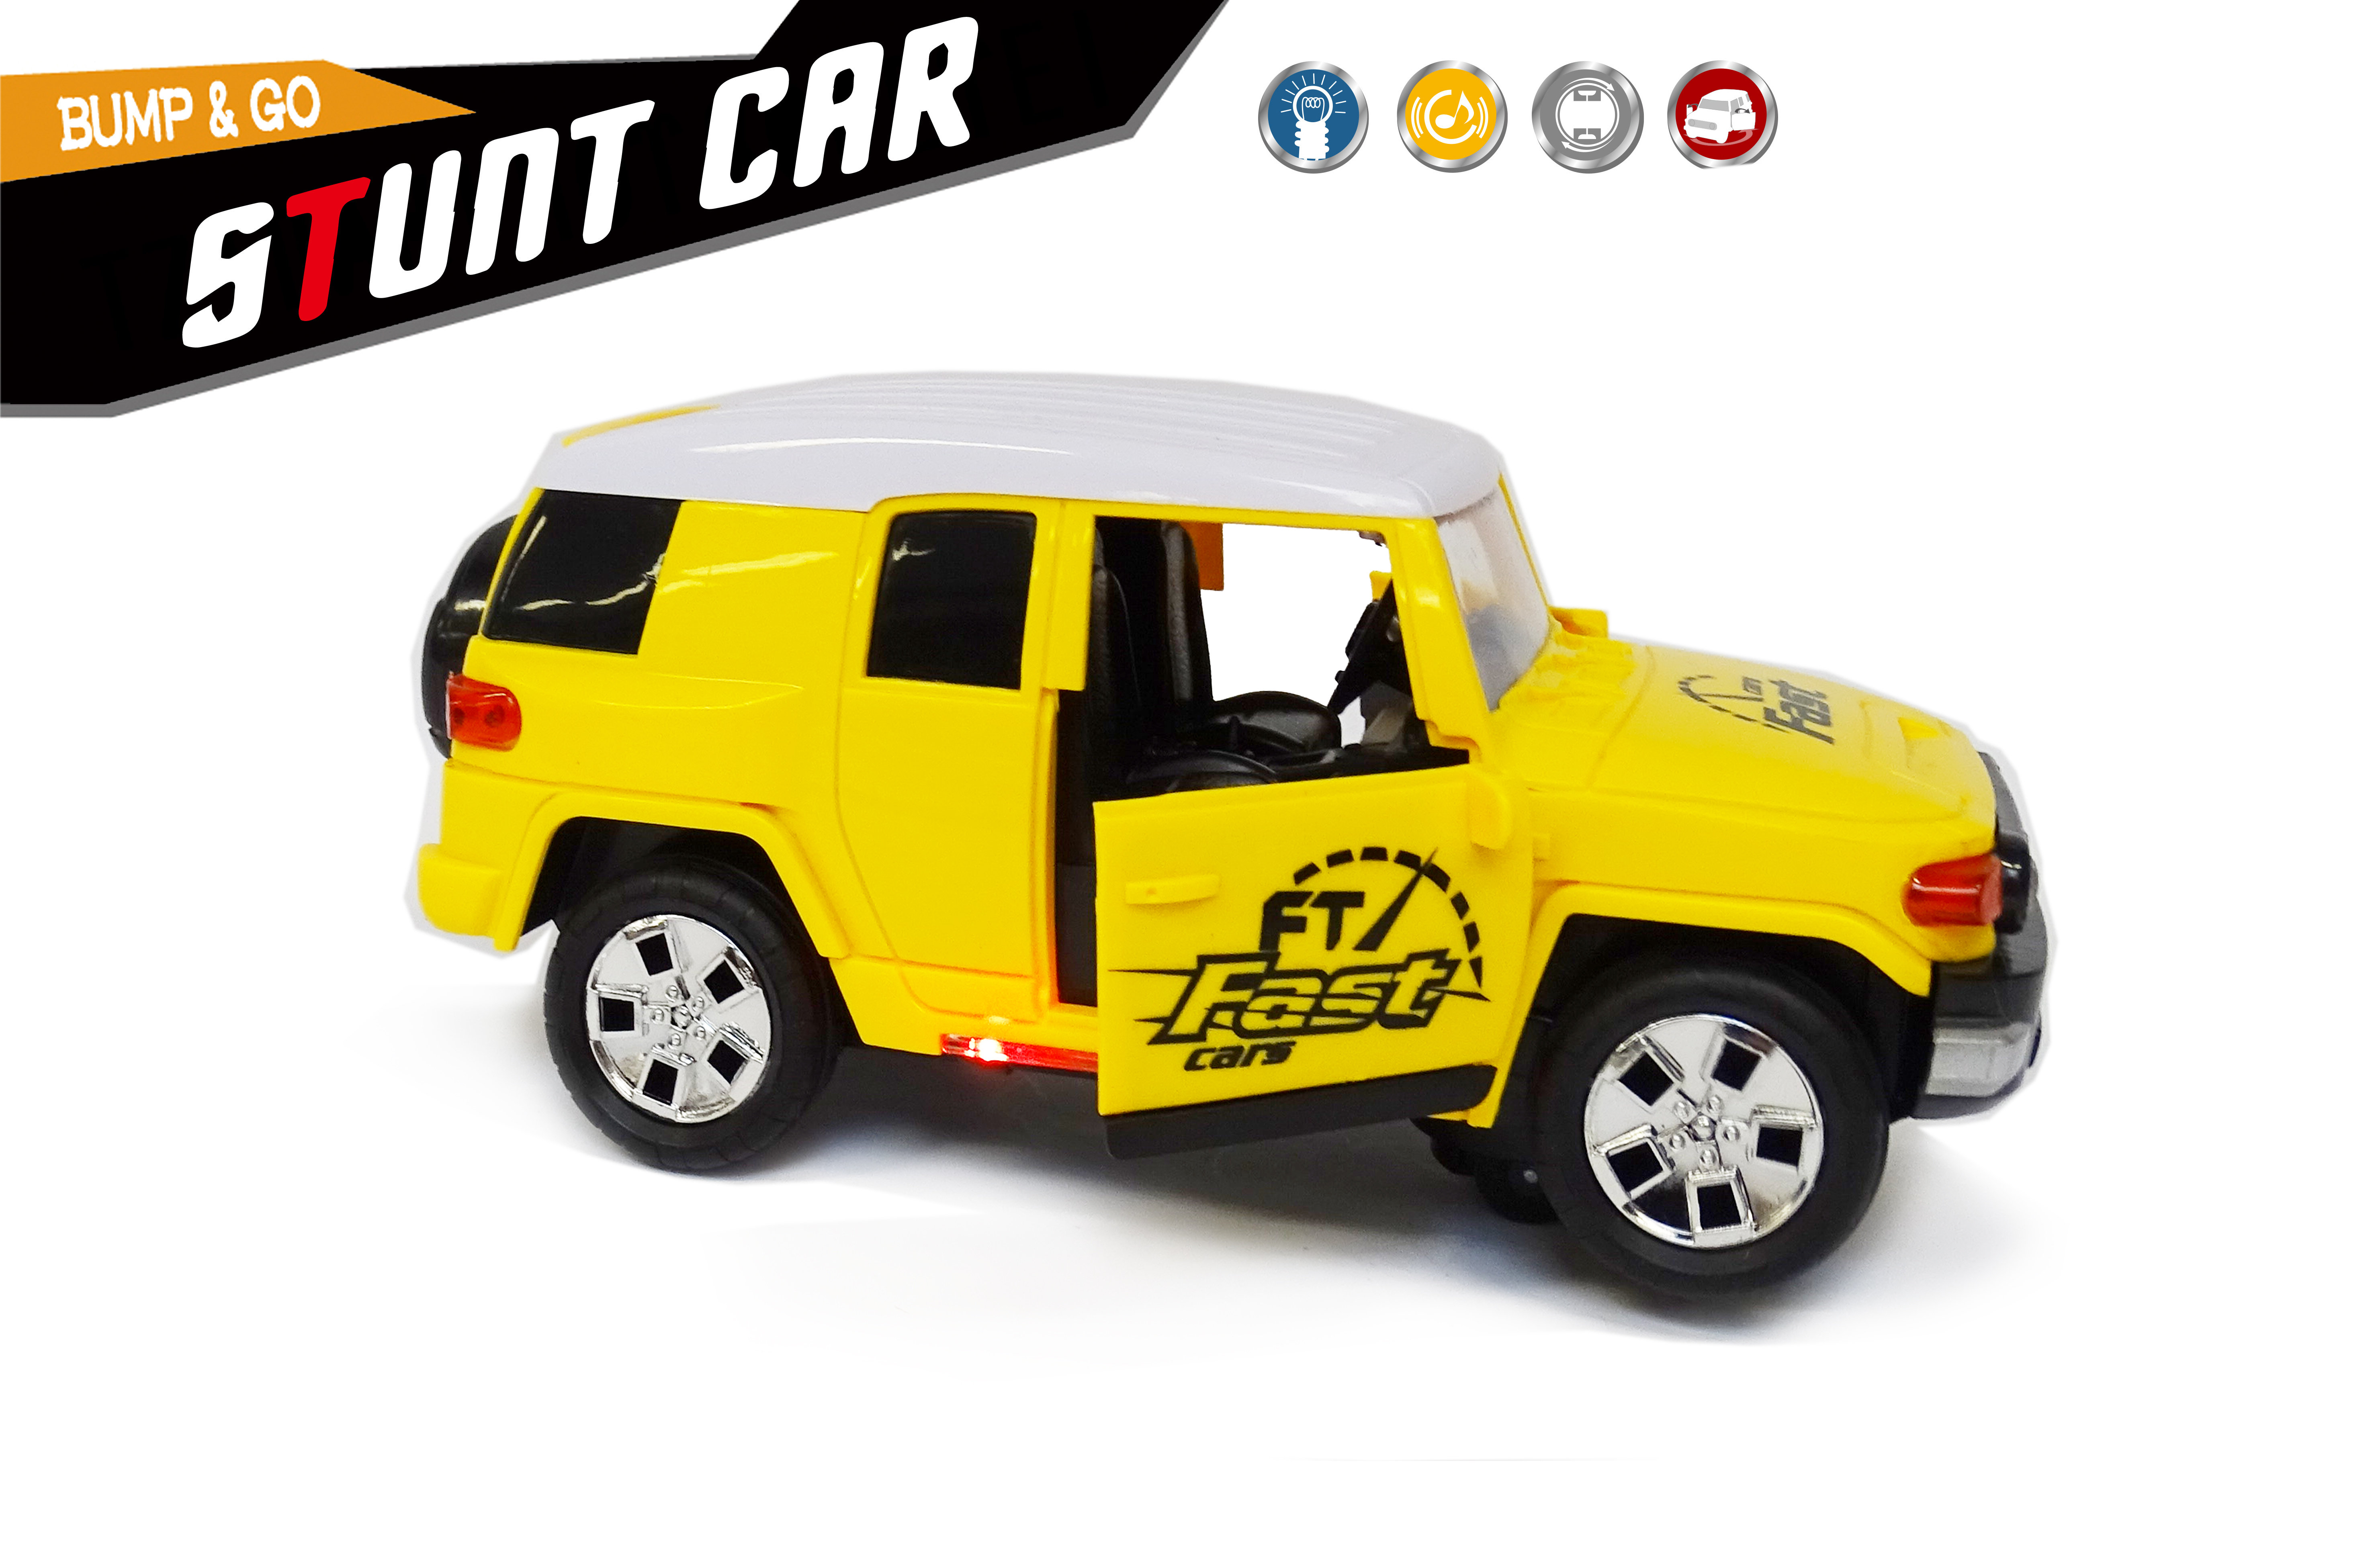 Stunt car toy - Super Max - Hummer with acrobatic movement -Led light and sound (20CM)